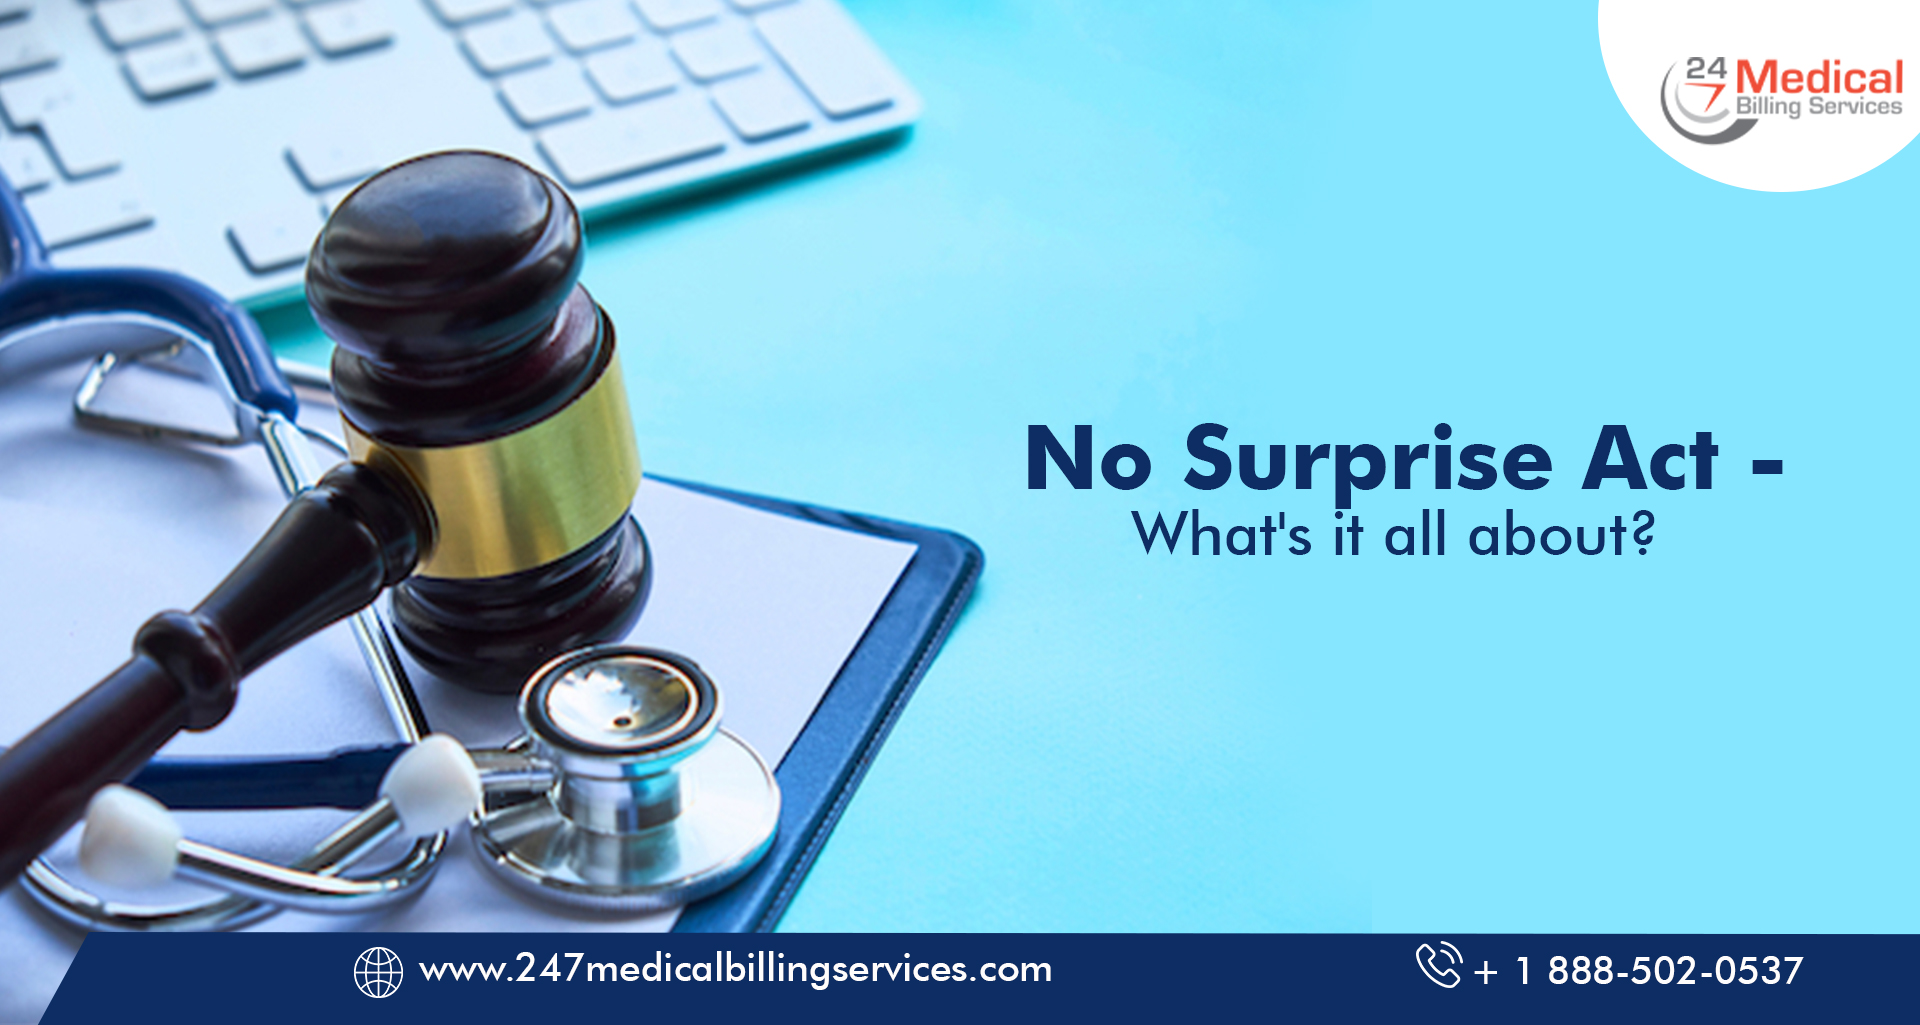 No Surprise Act What's it all about? 24/7 Medical Billing Services